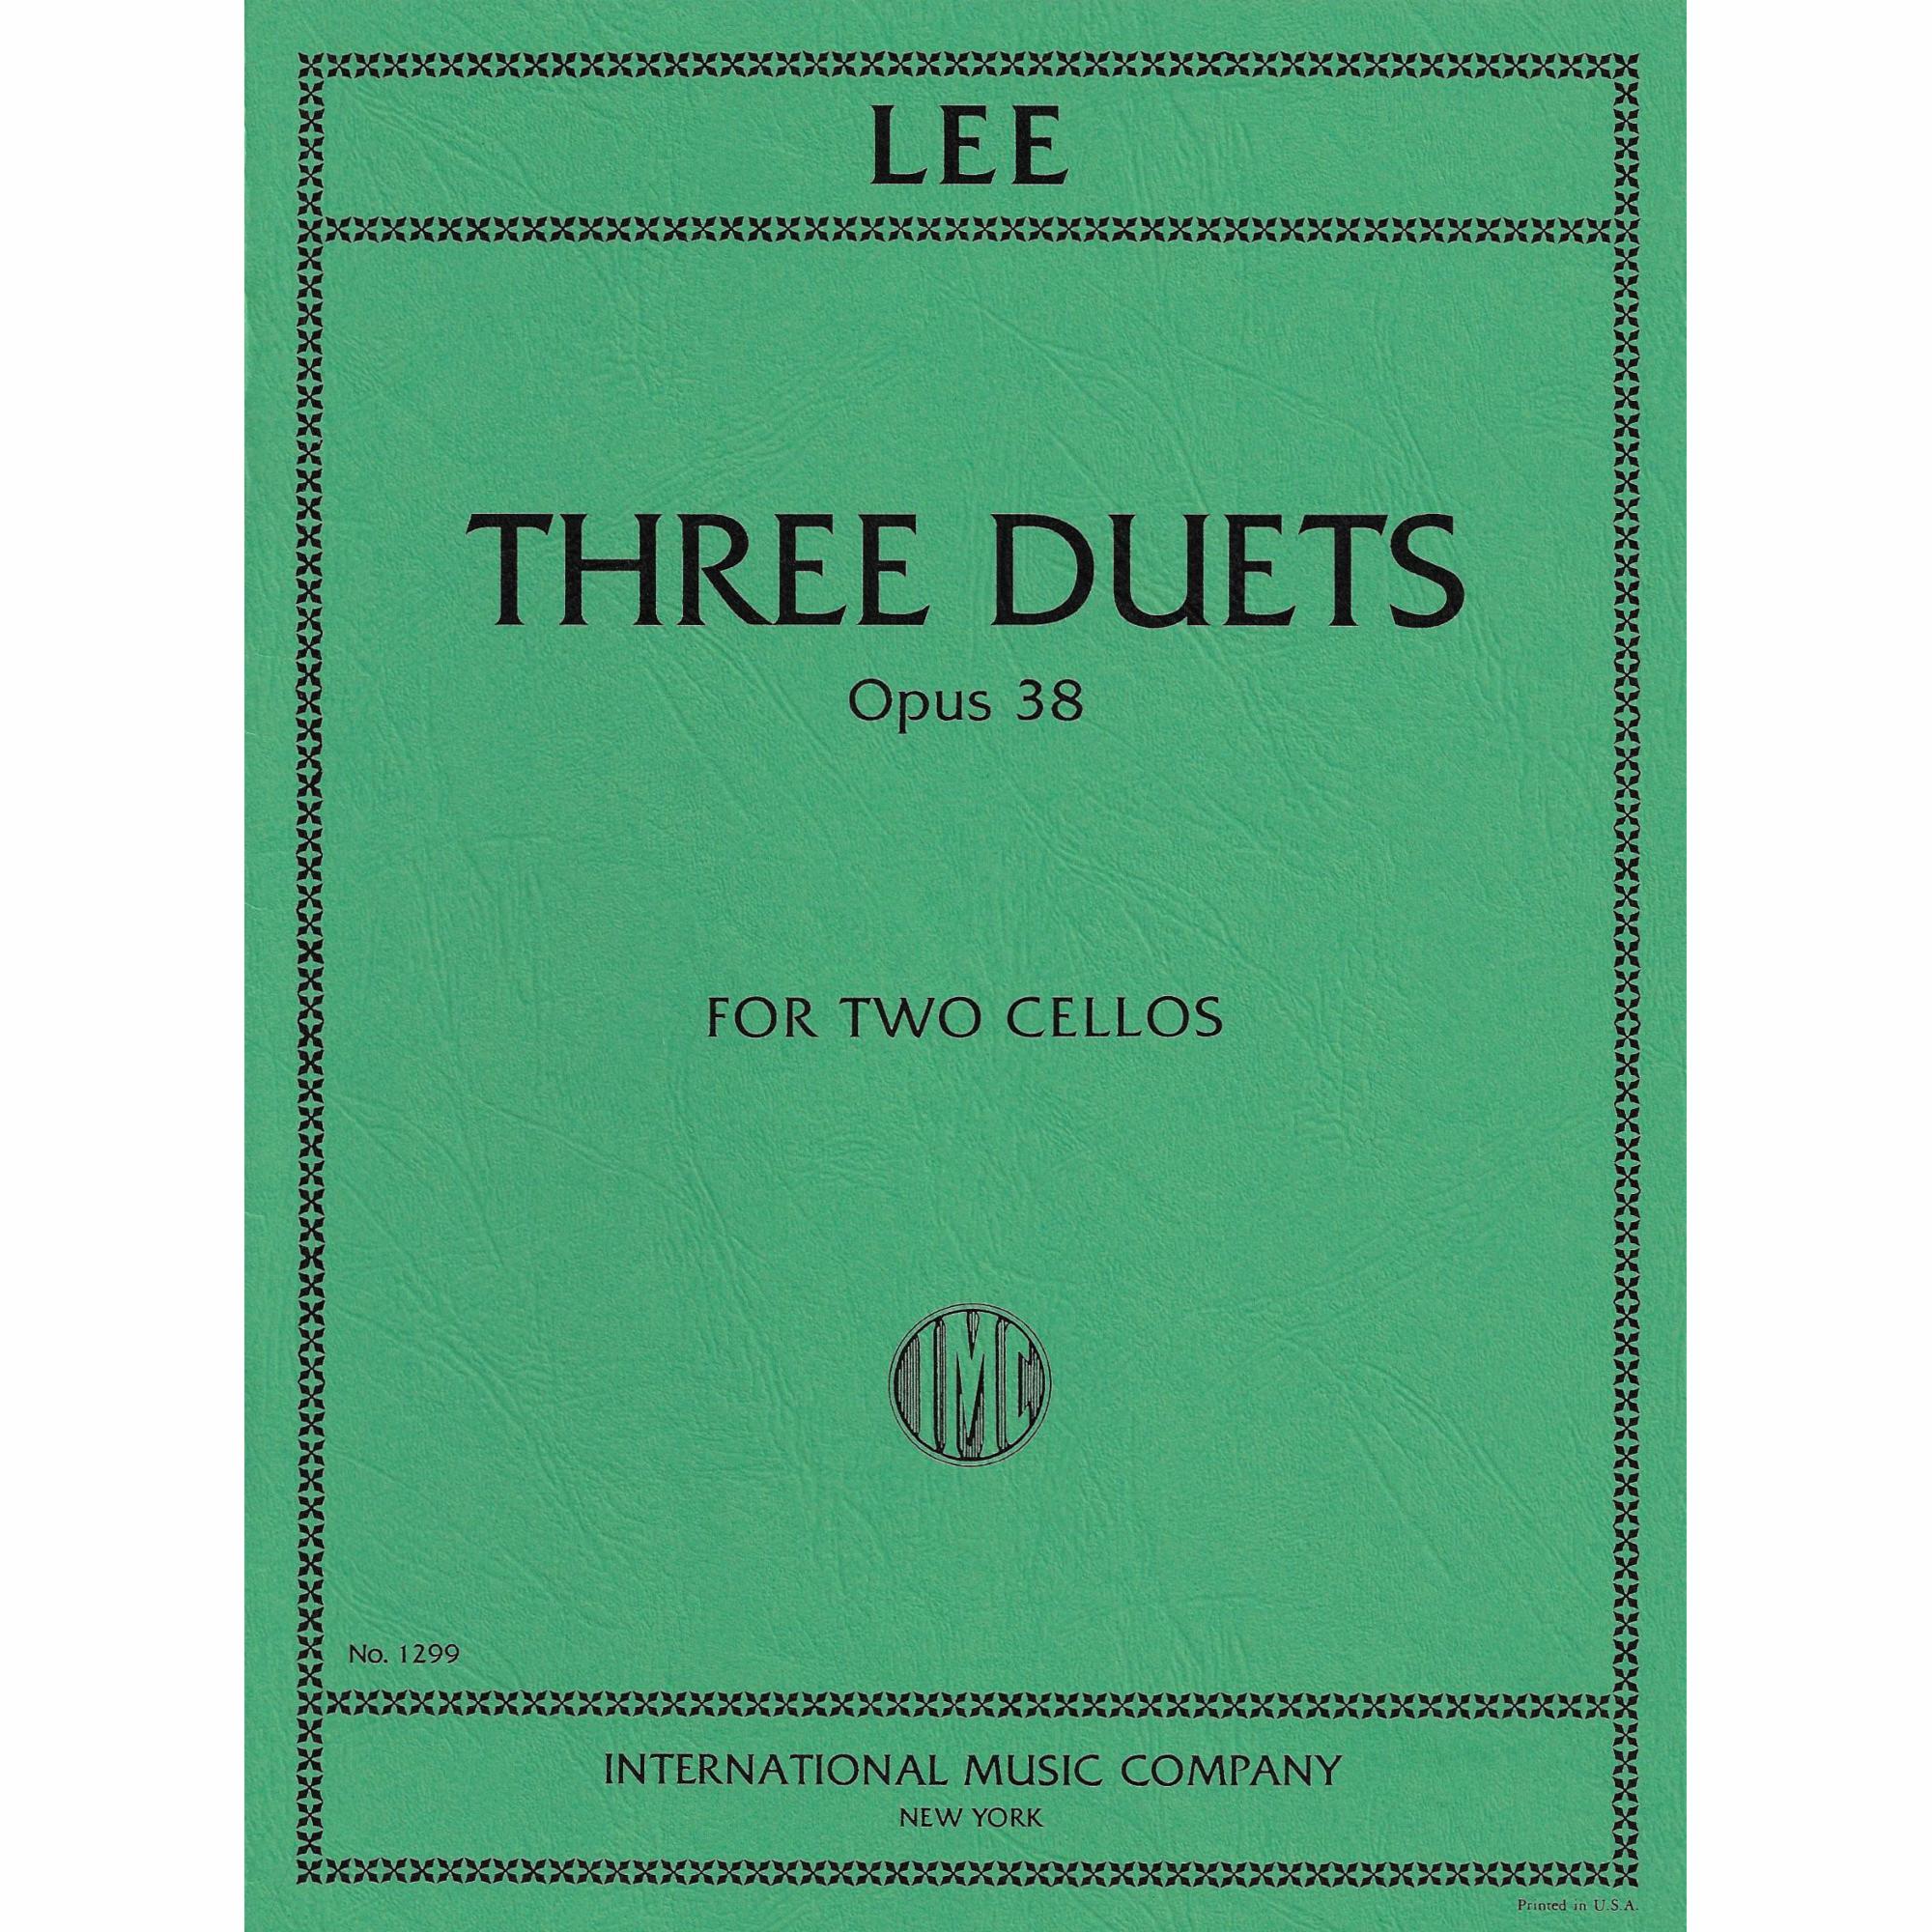 Lee -- Three Duets, Op. 38 for Two Cellos